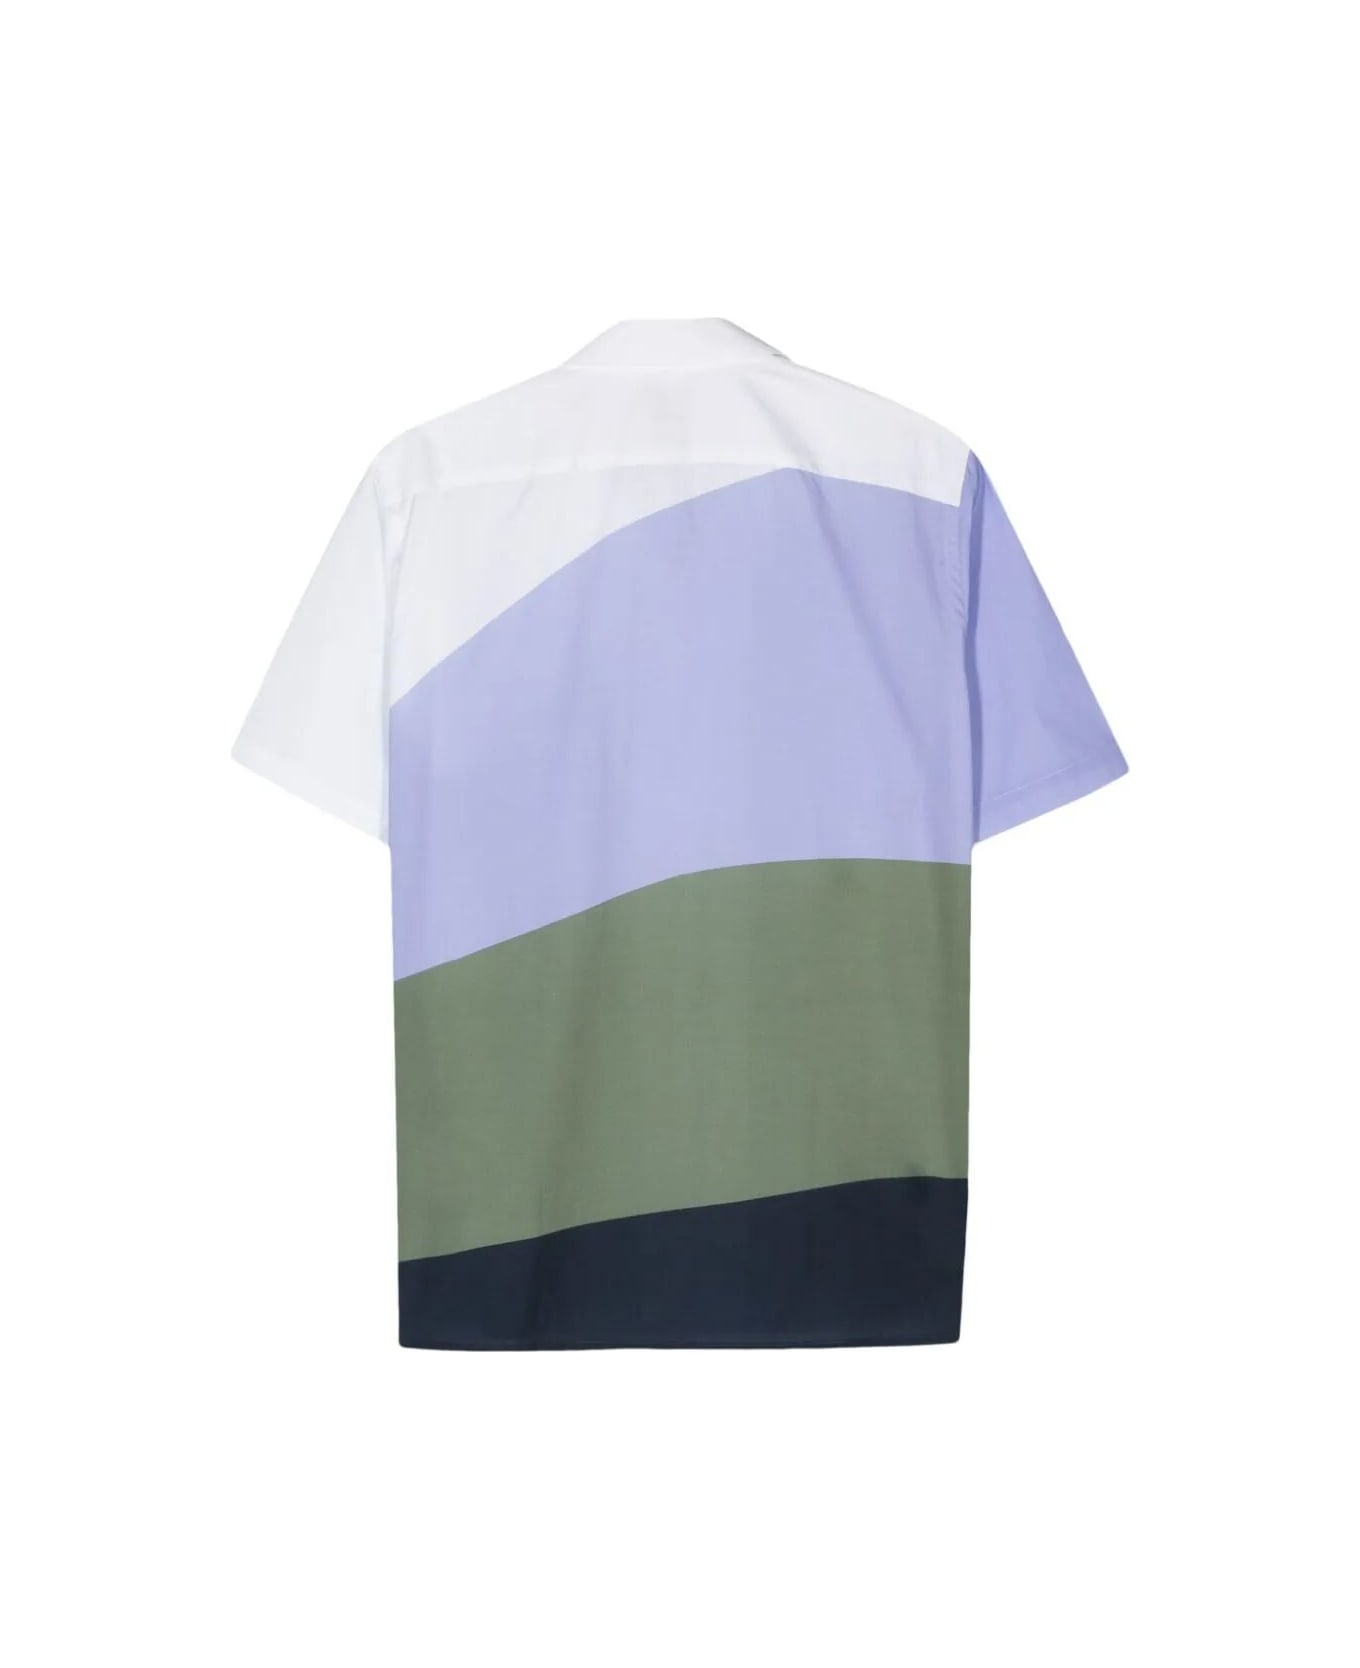 PS by Paul Smith Mens Ss Casual Fit Shirt - Purples シャツ